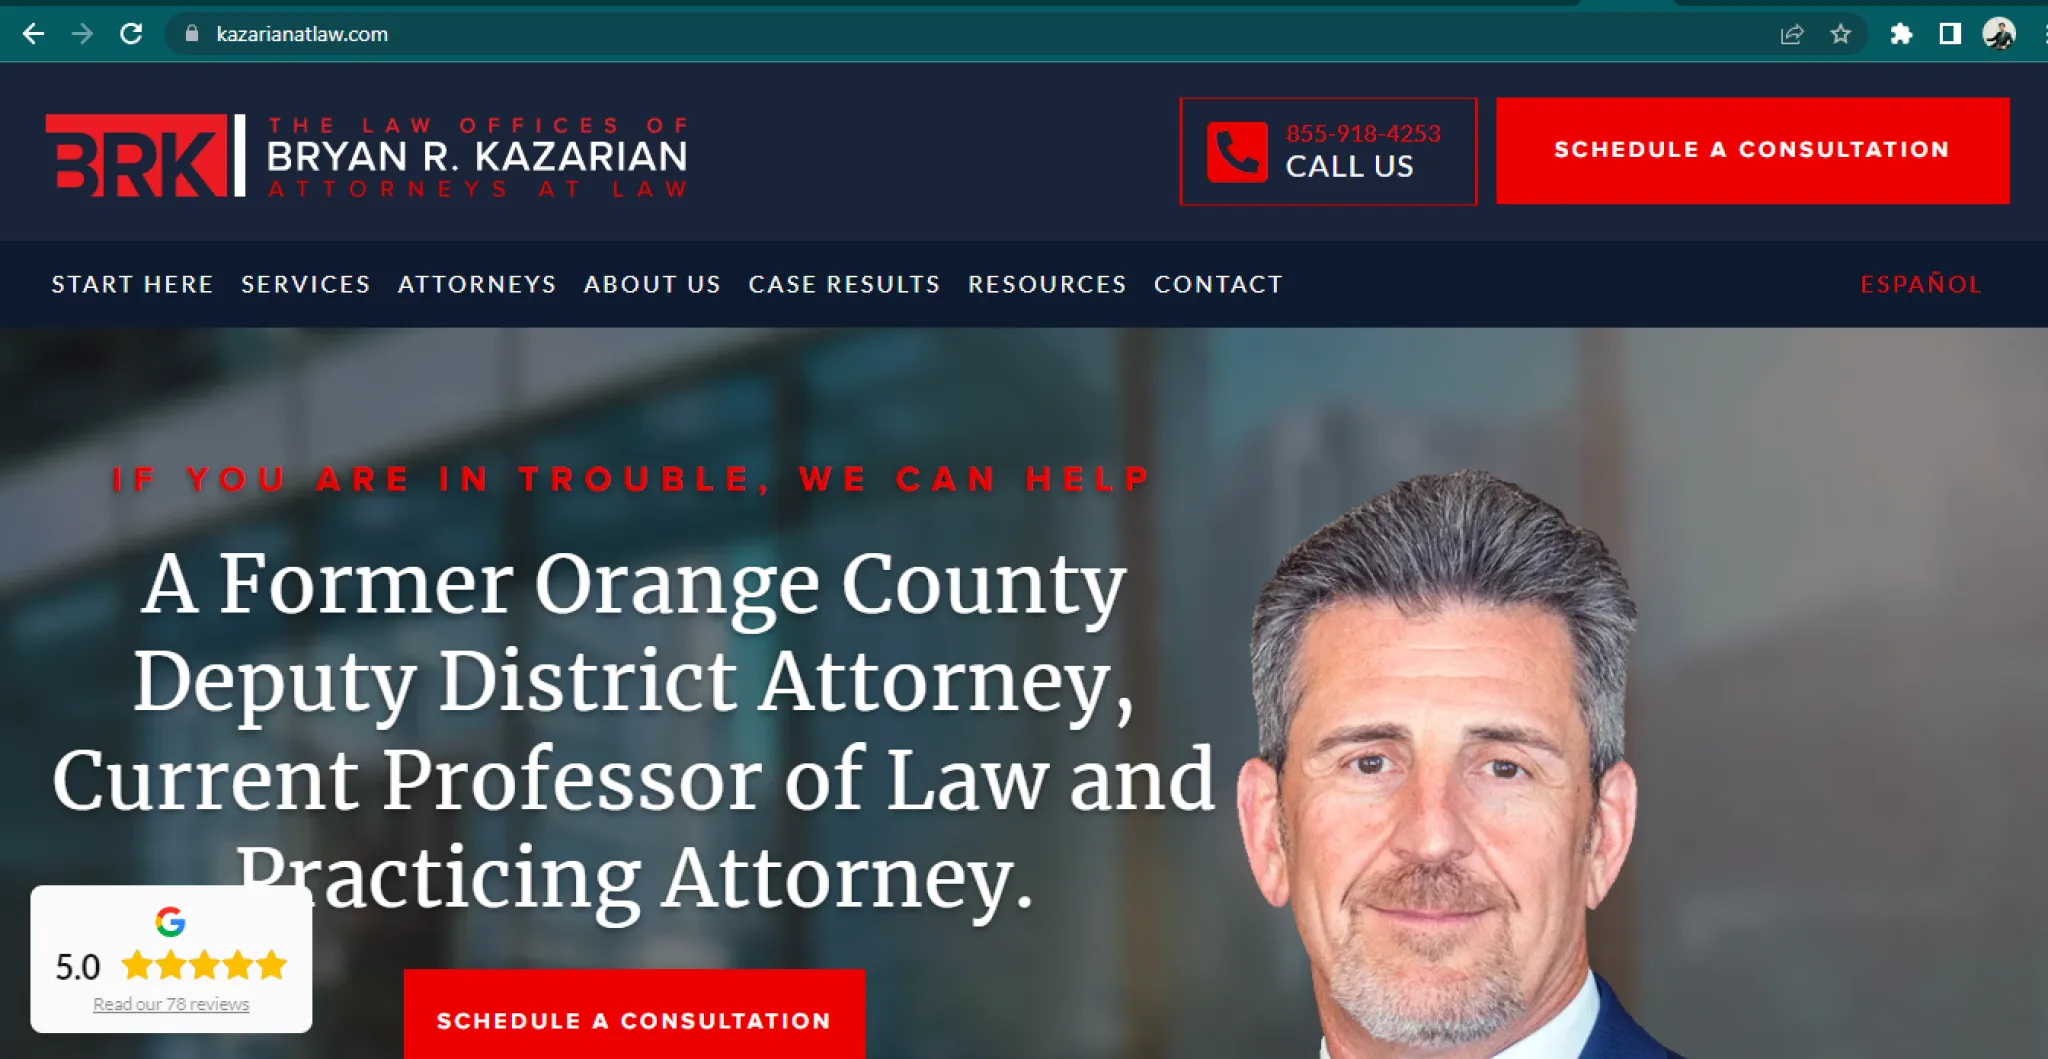 Law Offices Of Bryan R. Kazarian Review